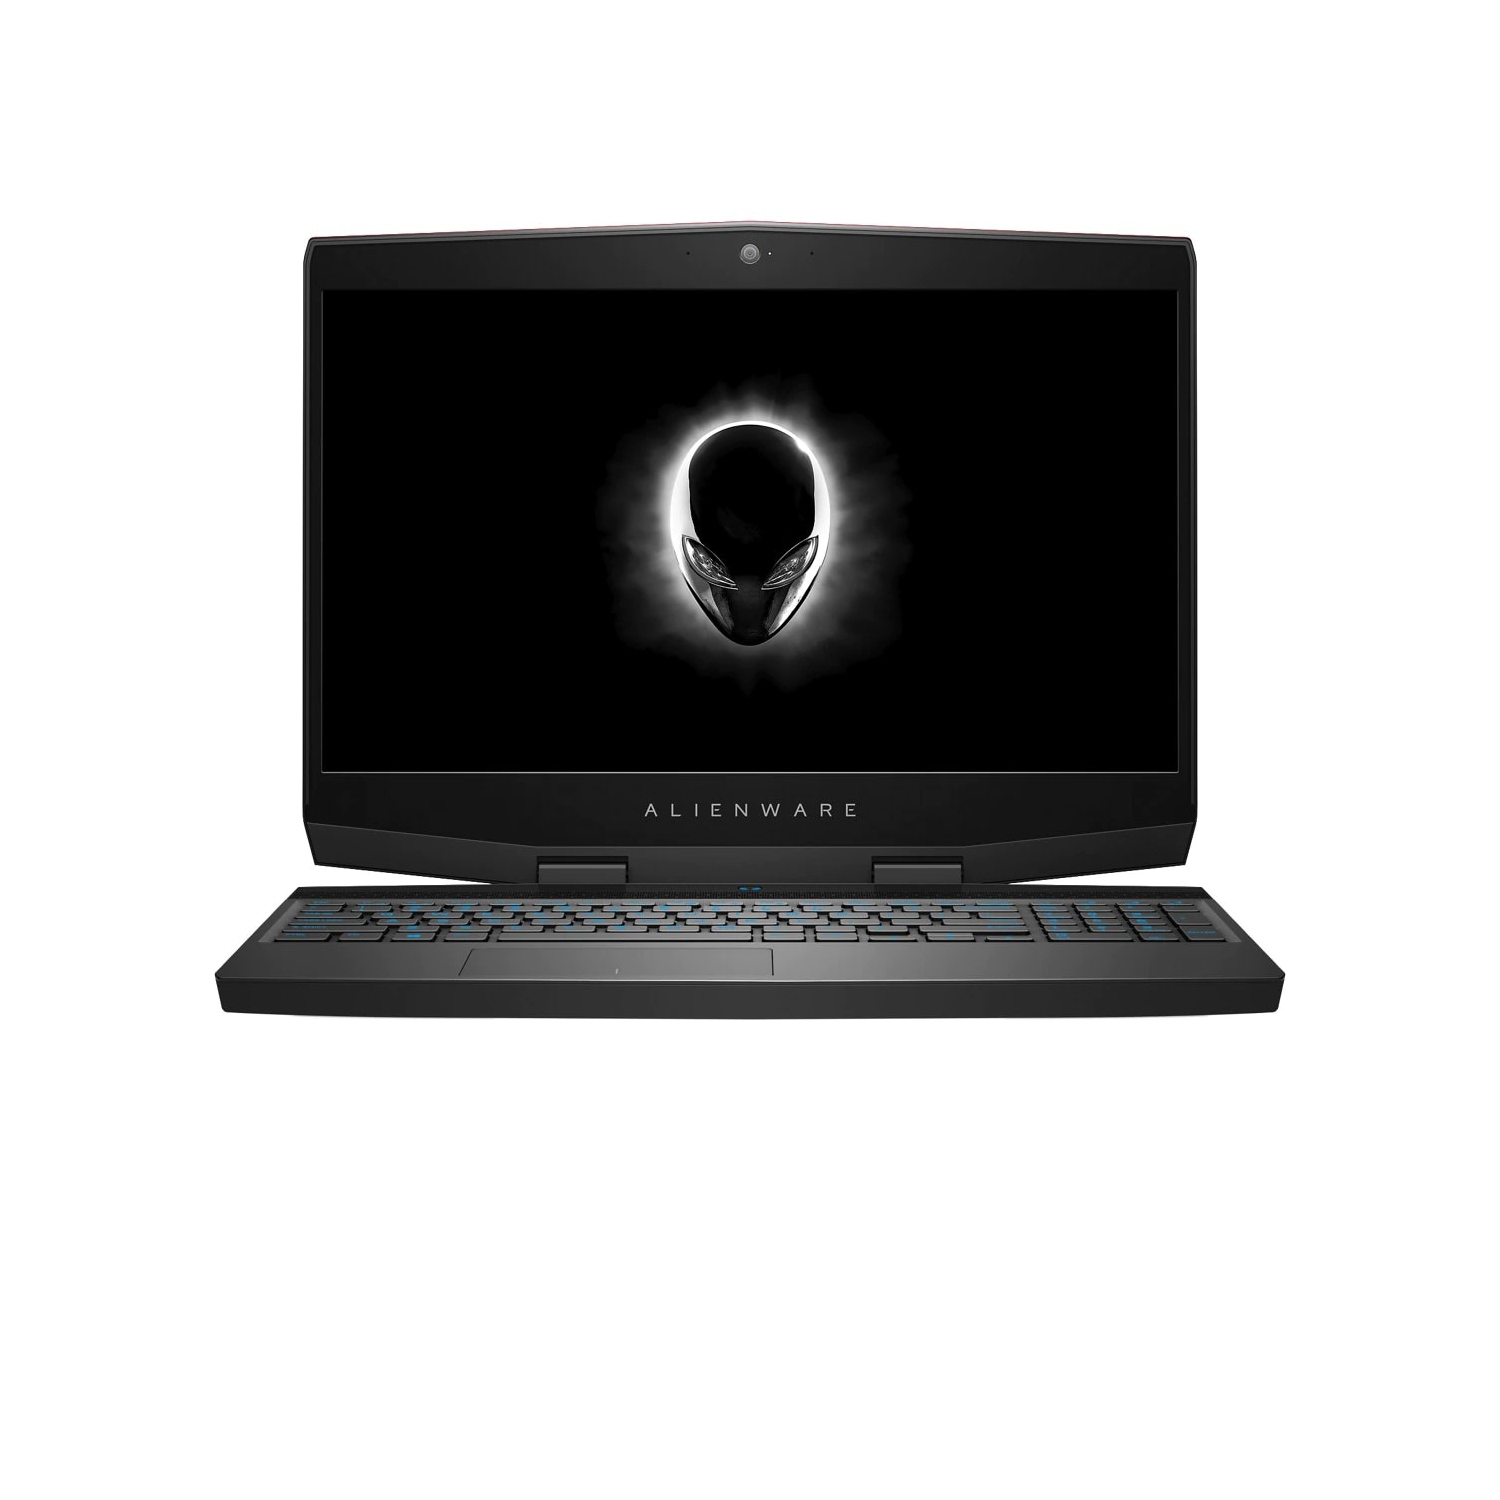 Refurbished (Excellent) – Dell Alienware m15 Gaming Laptop (2018) | 15.6" FHD | Core i7 - 128GB SSD + 1TB SSHD - 16GB RAM - GTX 1070 | 6 Cores @ 4.1 GHz - 8GB GDDR5